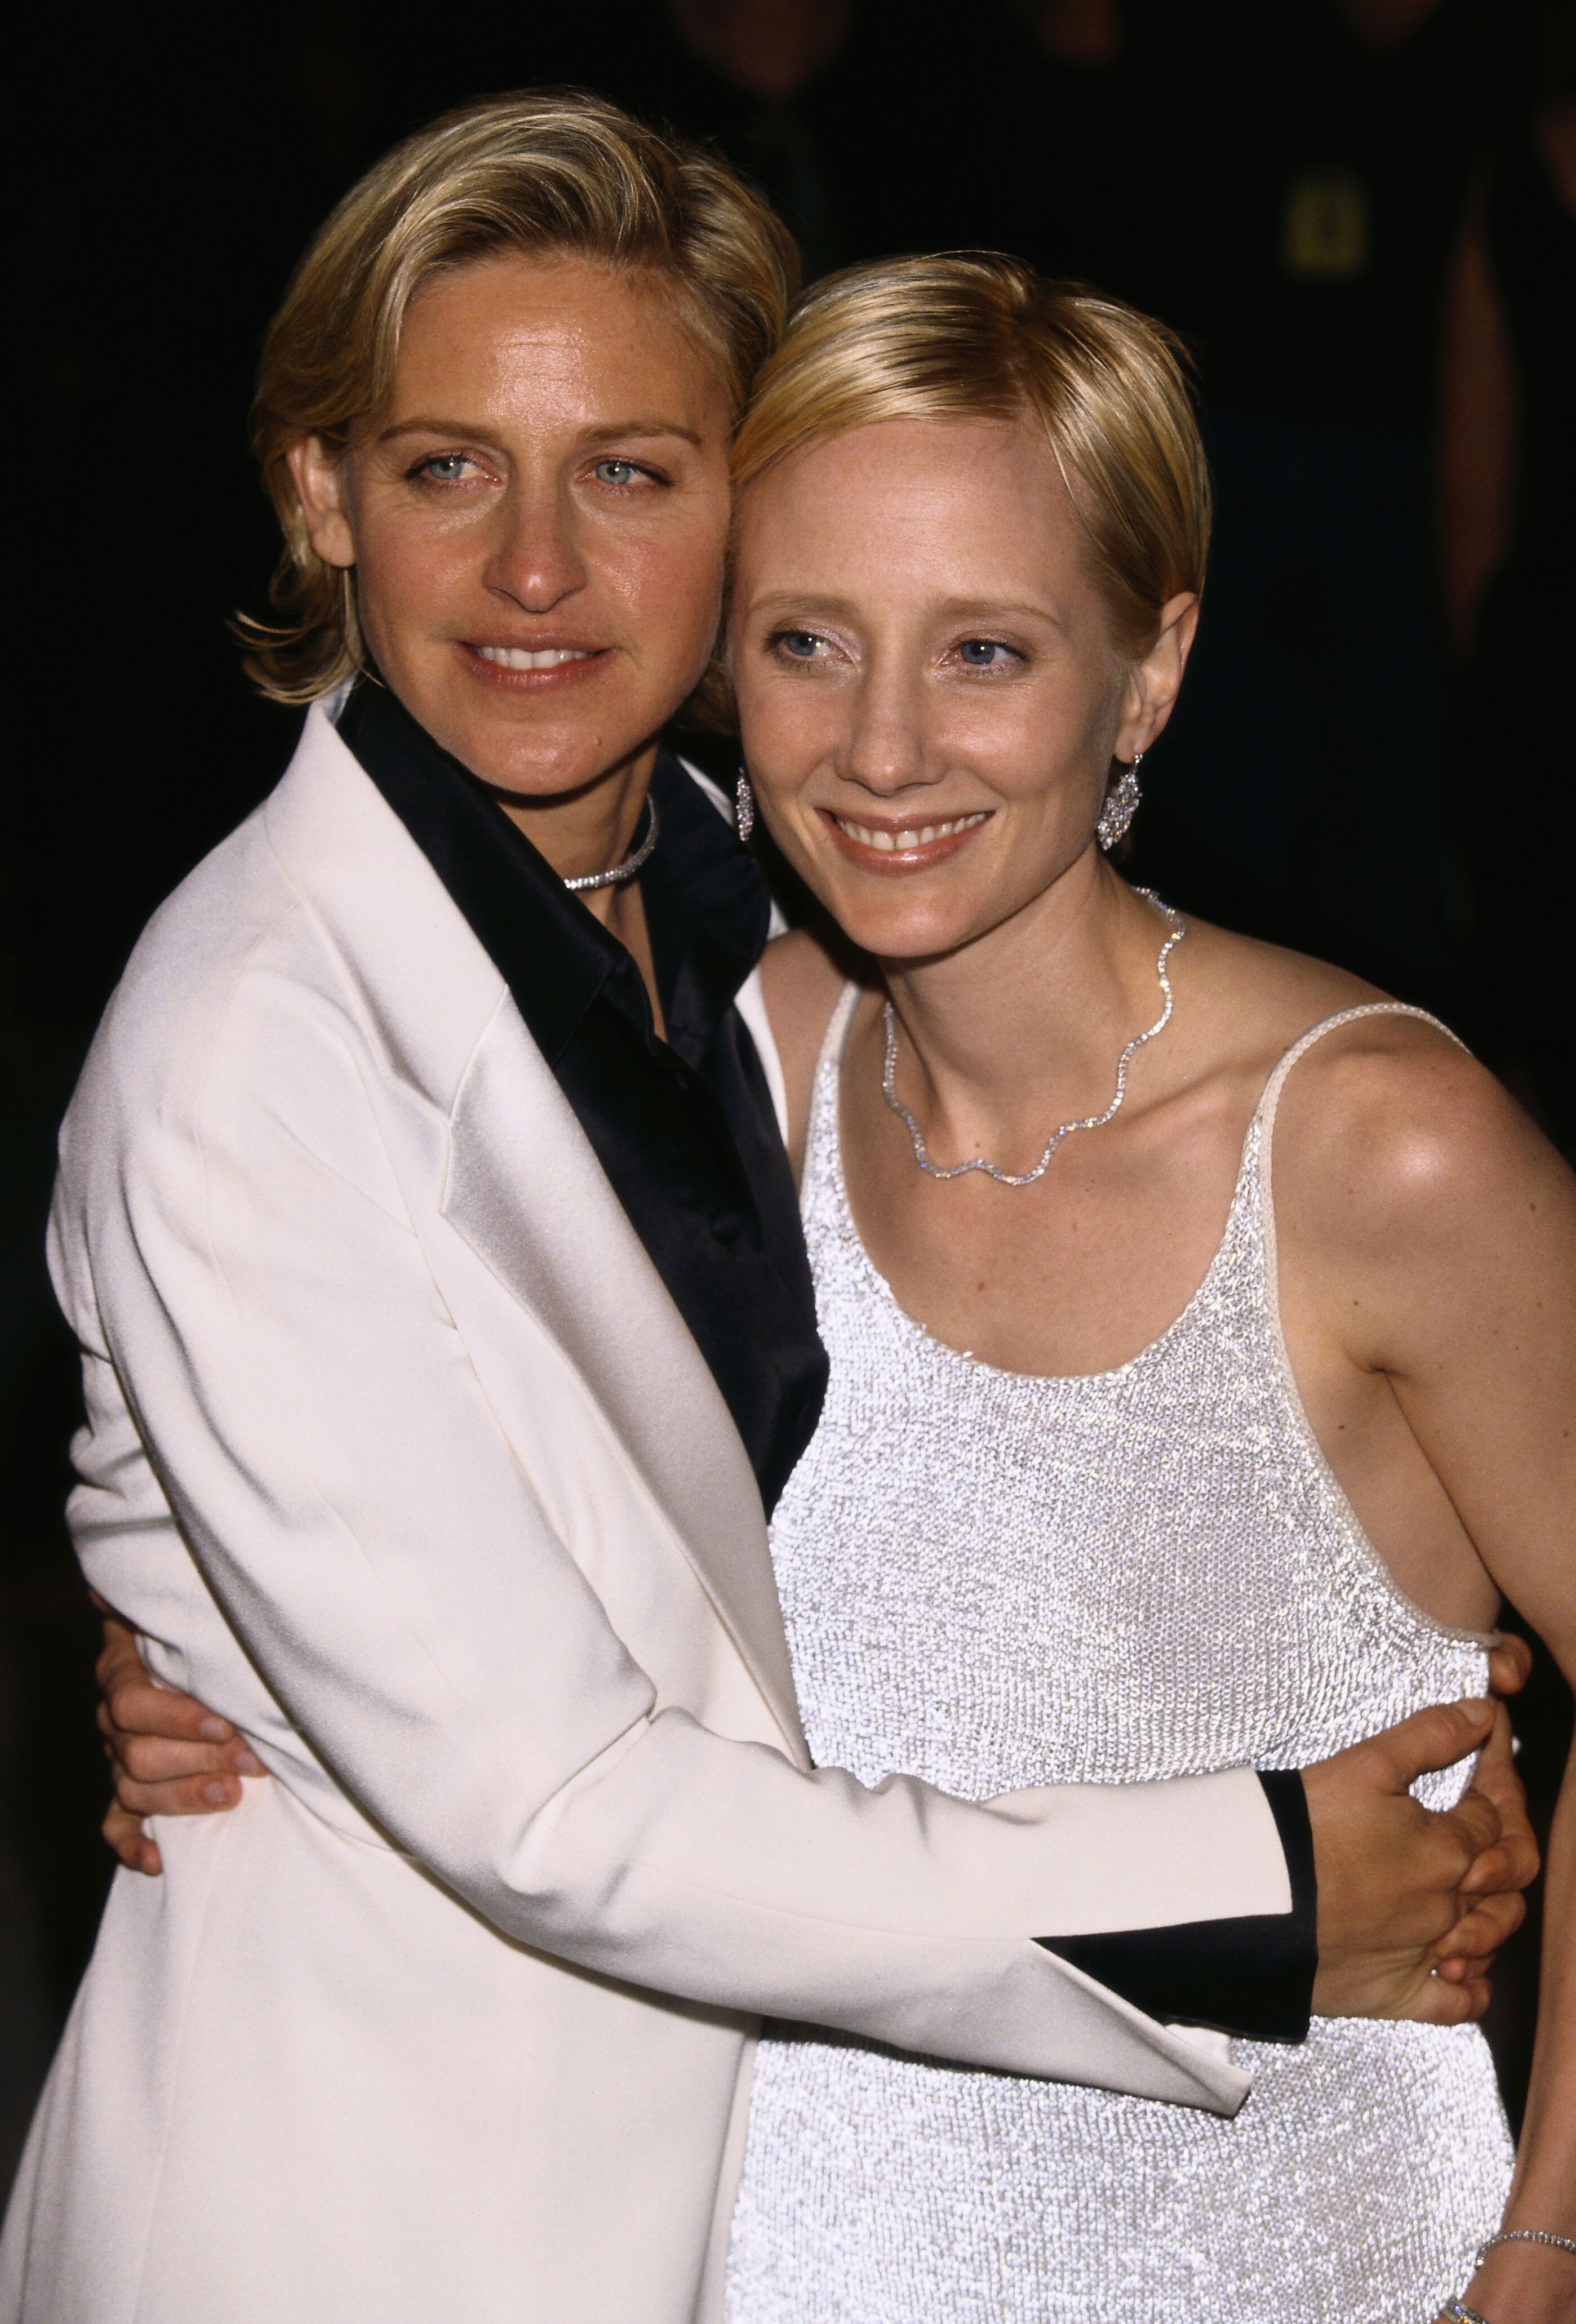 Anne Heche and Ellen Degeneres arrive at the 71st Oscars Ceremony in Los Angeles| Source: Getty Images